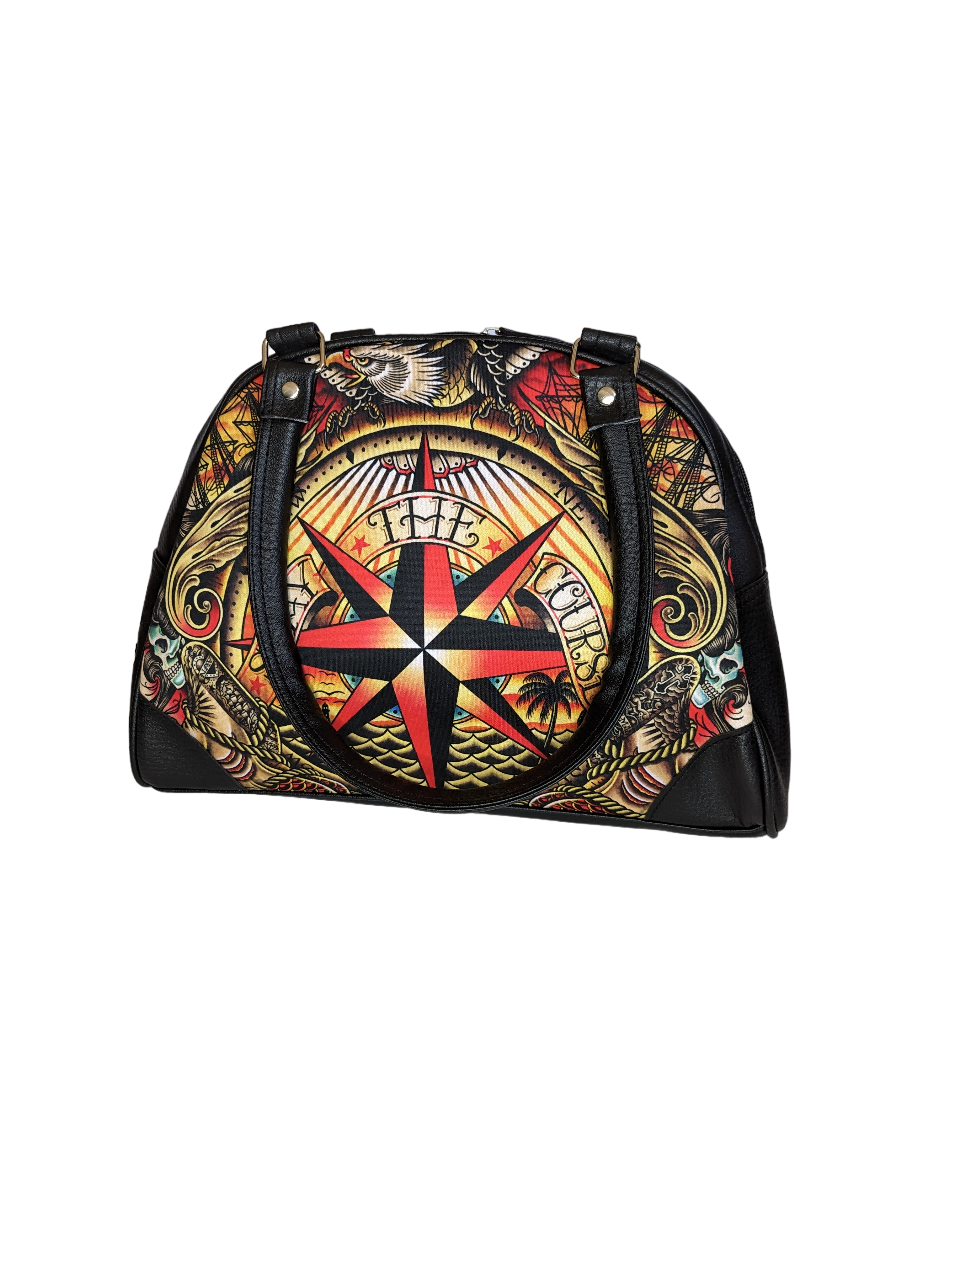 Liquorbrand Stay the Course Old School Tattoo Nautical Compass Star Bag Purse